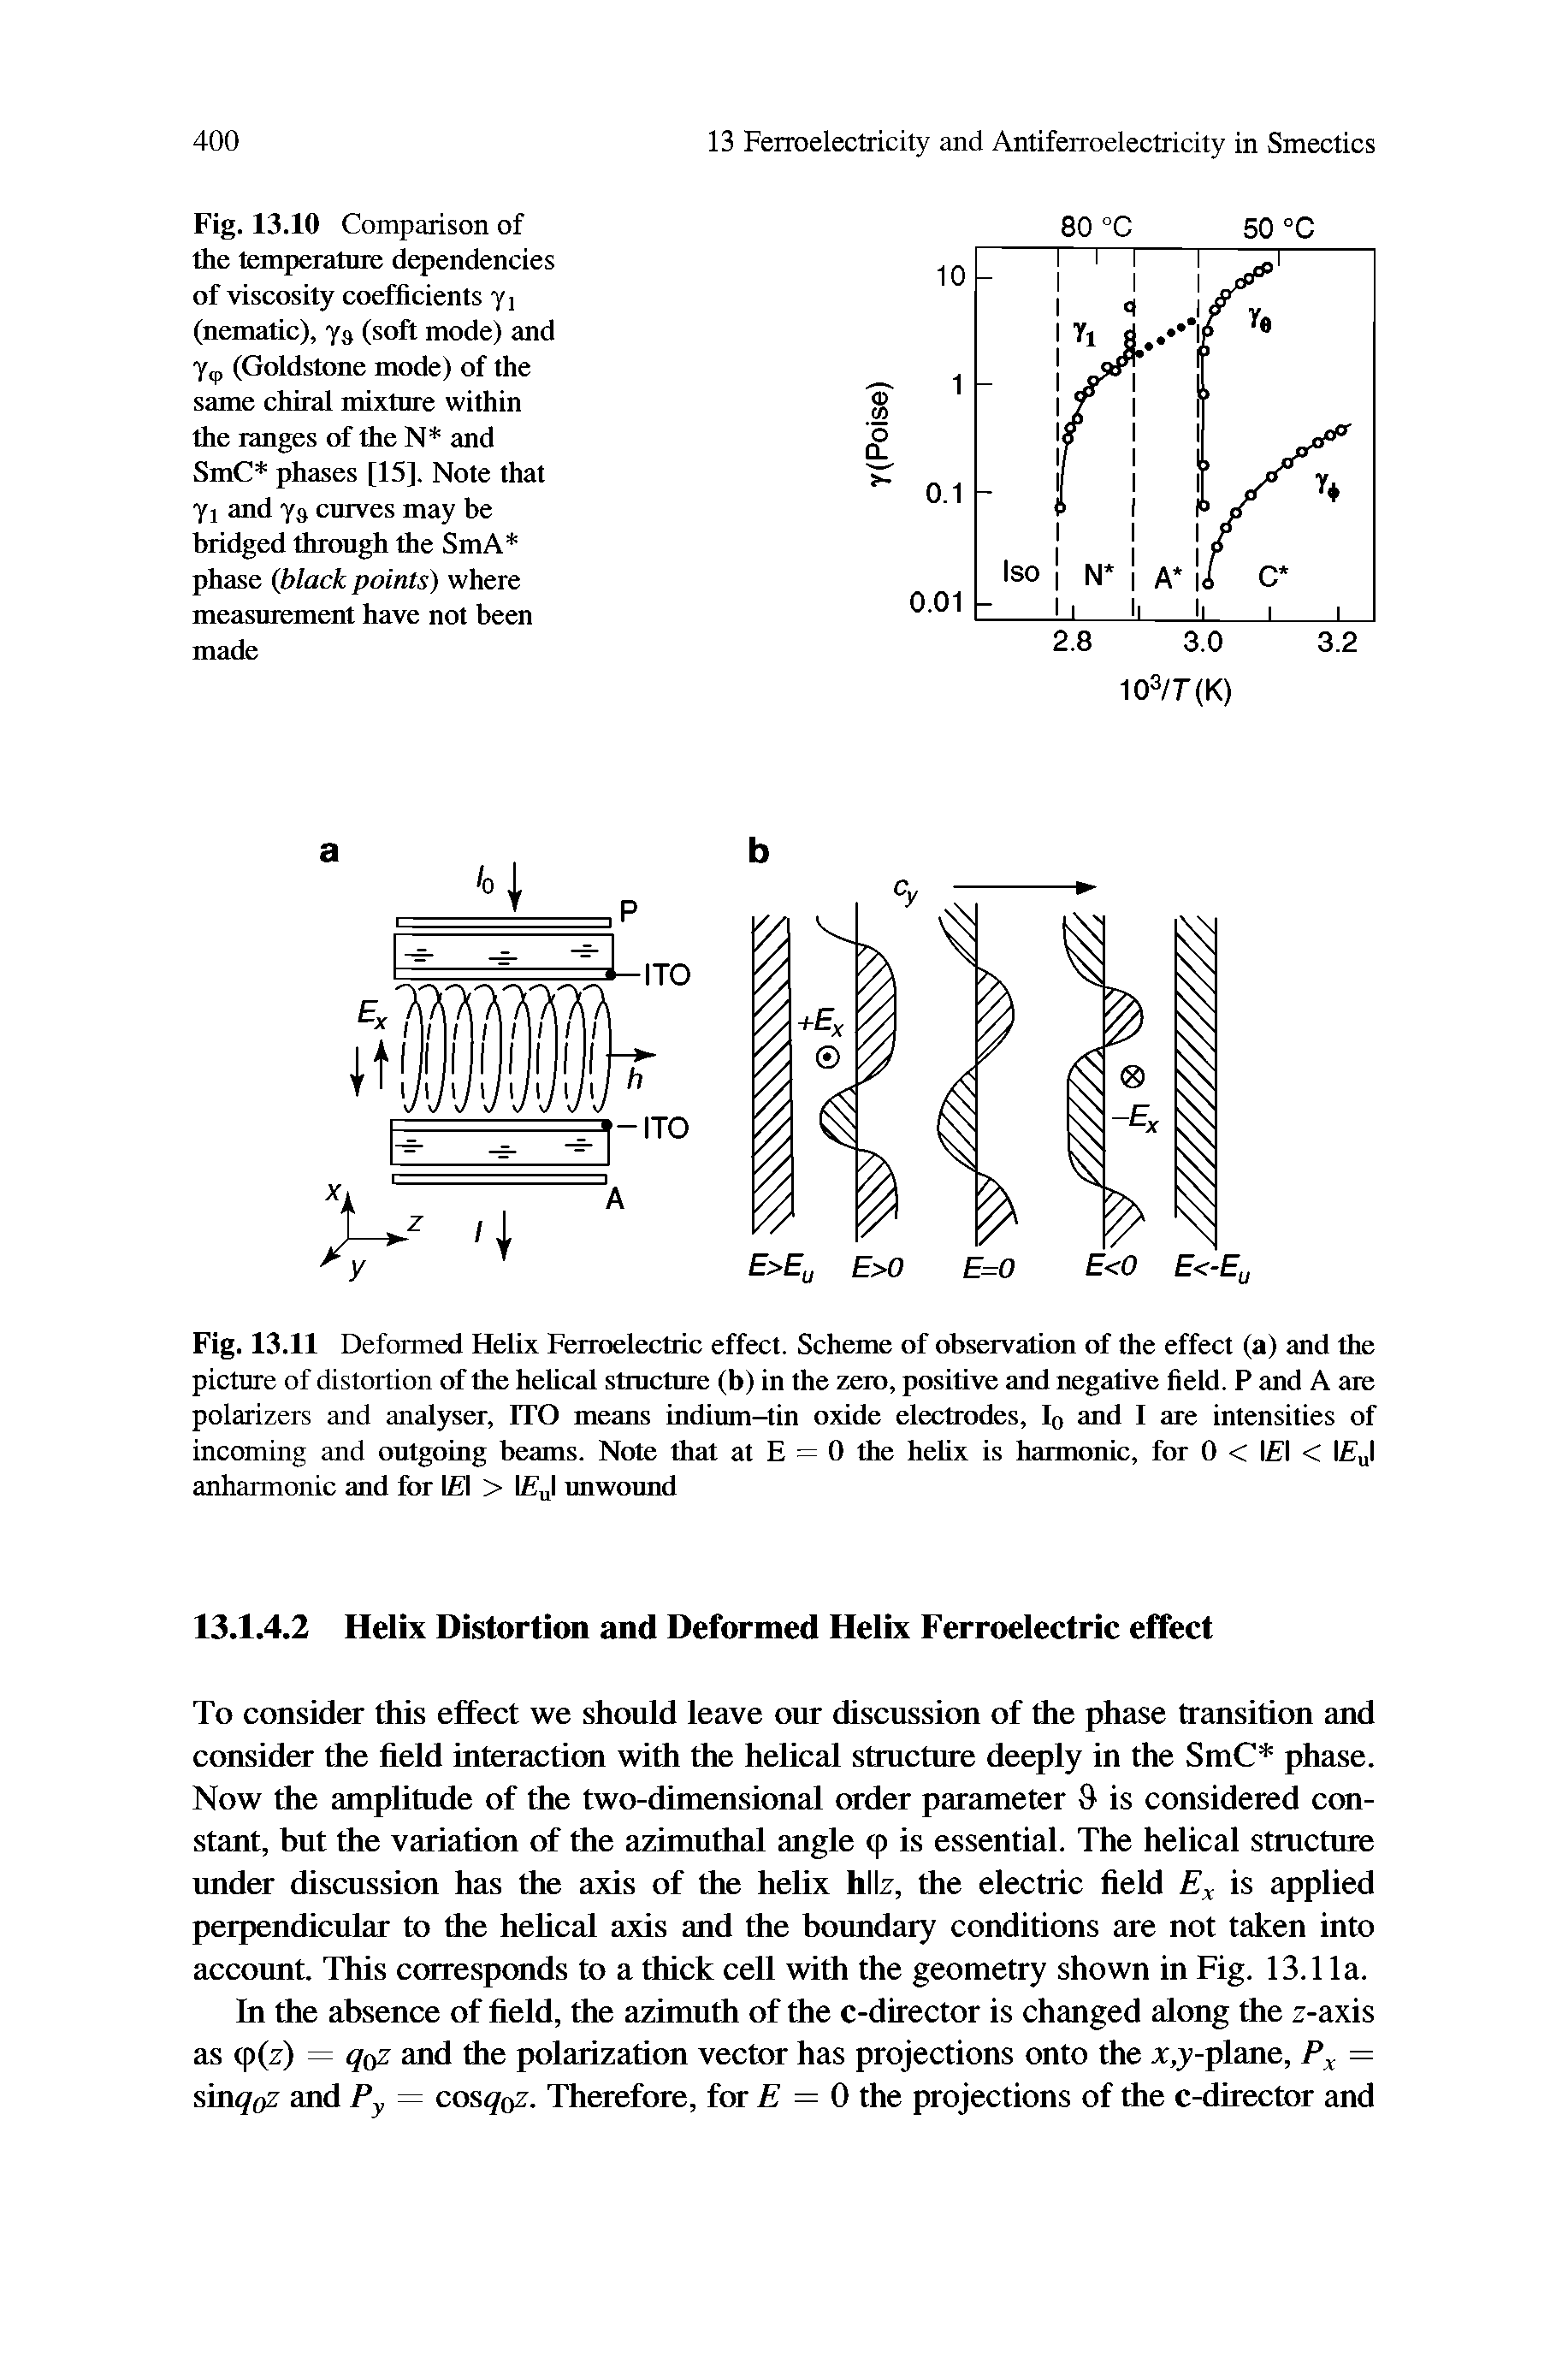 Fig. 13.11 Deformed Helix Ferroelectric effect. Scheme of observation of the effect (a) and the picture of distortion of the hehcal stmcture (b) in the zero, positive and negative field. P and A are polarizers and analyser, ITO means indium-tin oxide electrodes, Iq and I are intensities of incoming and outgoing beams. Note that at E = 0 the hehx is harmonic, for 0 < l l < anharmonic and for l l > l J unwound...